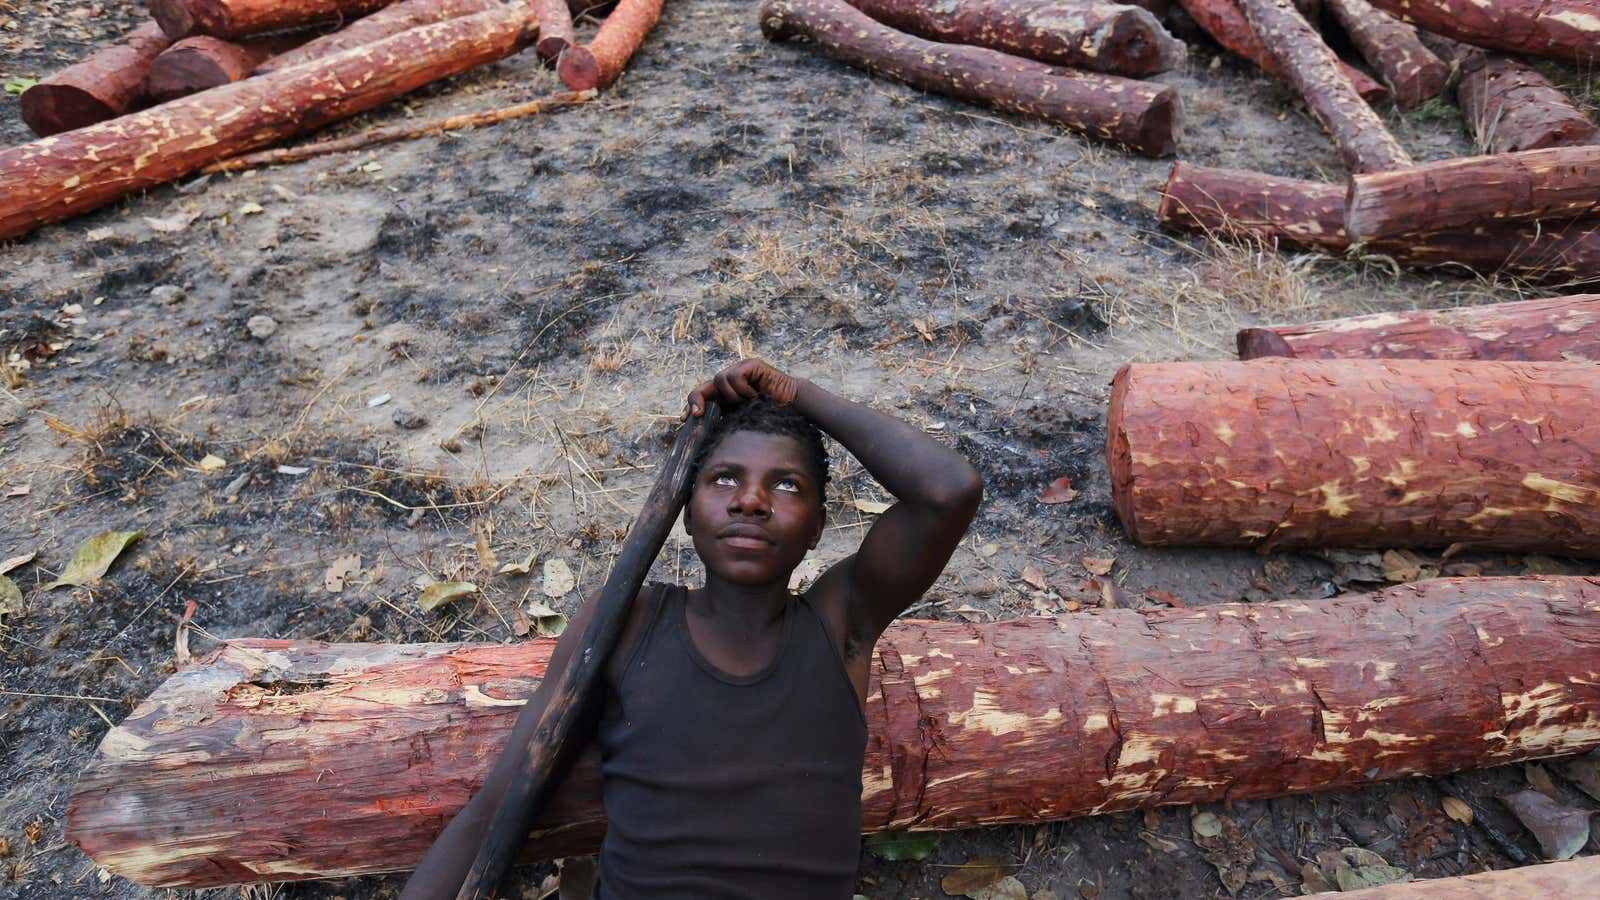 A logger in the Democratic Republic of Congo rests near felled Mukula trees.